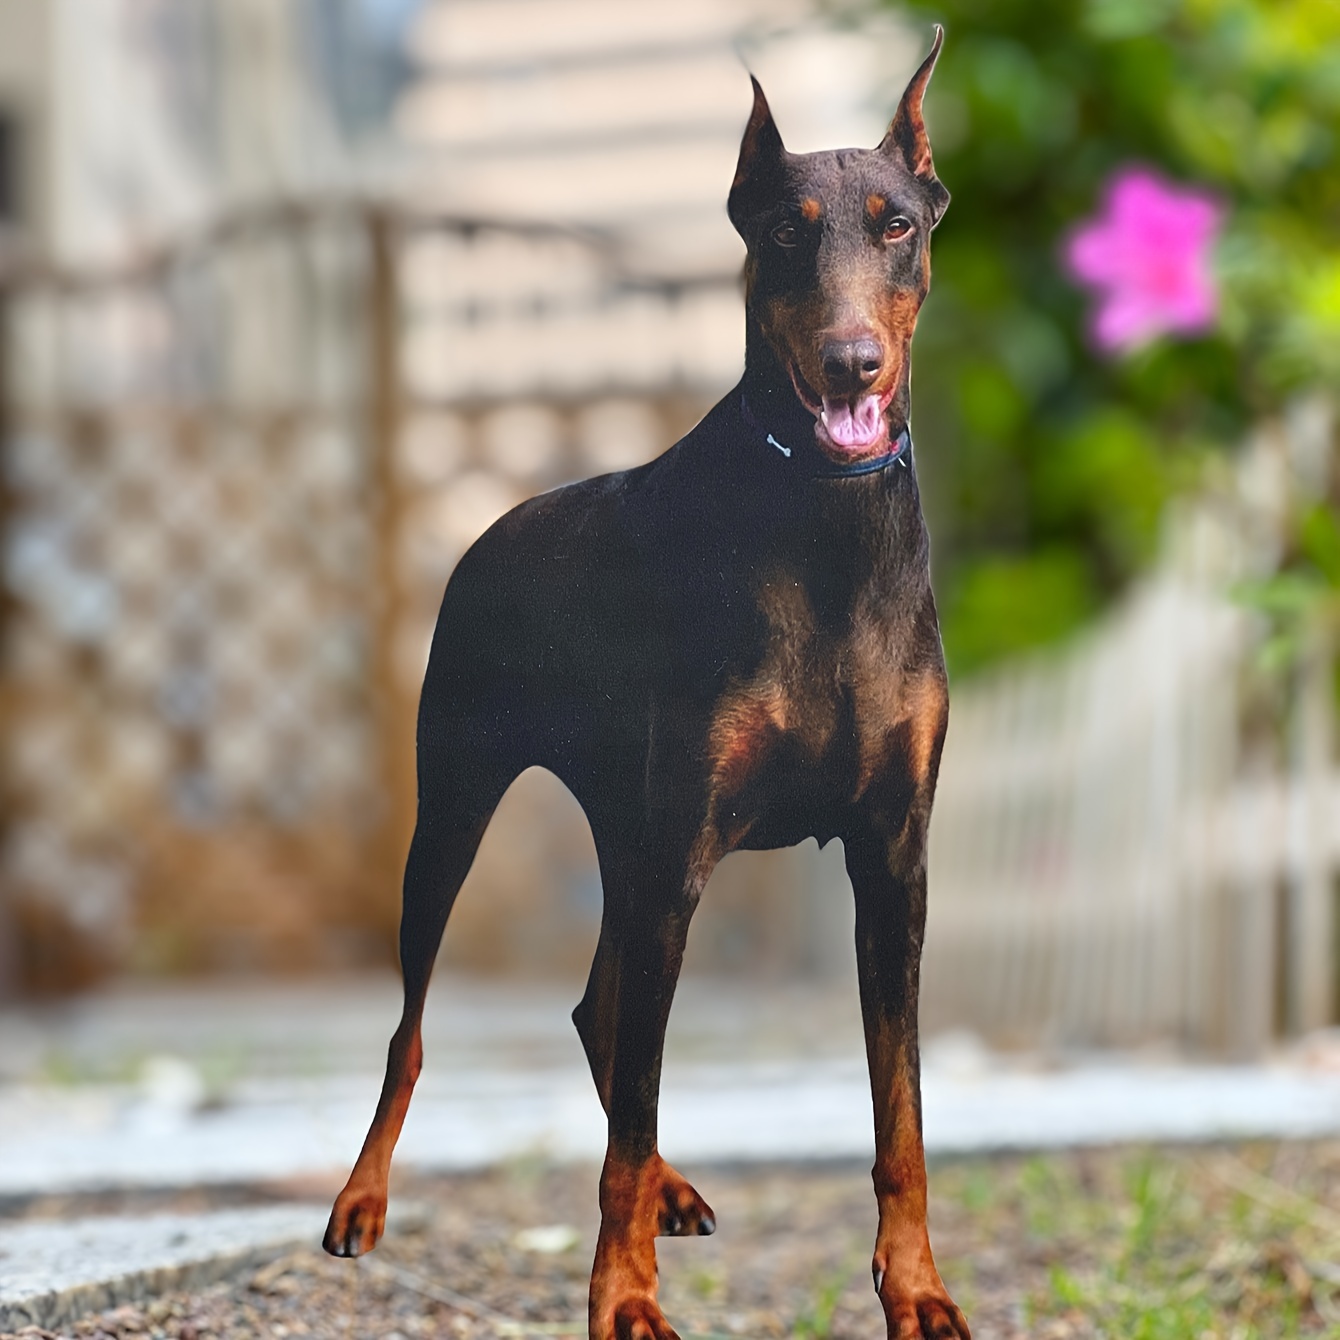 

1pc Classic Doberman Pinscher Dog Acrylic Garden Stake, Animal Theme Outdoor Decor For Flag Day, Durable Lawn Ornament With No Electricity Or Battery Required